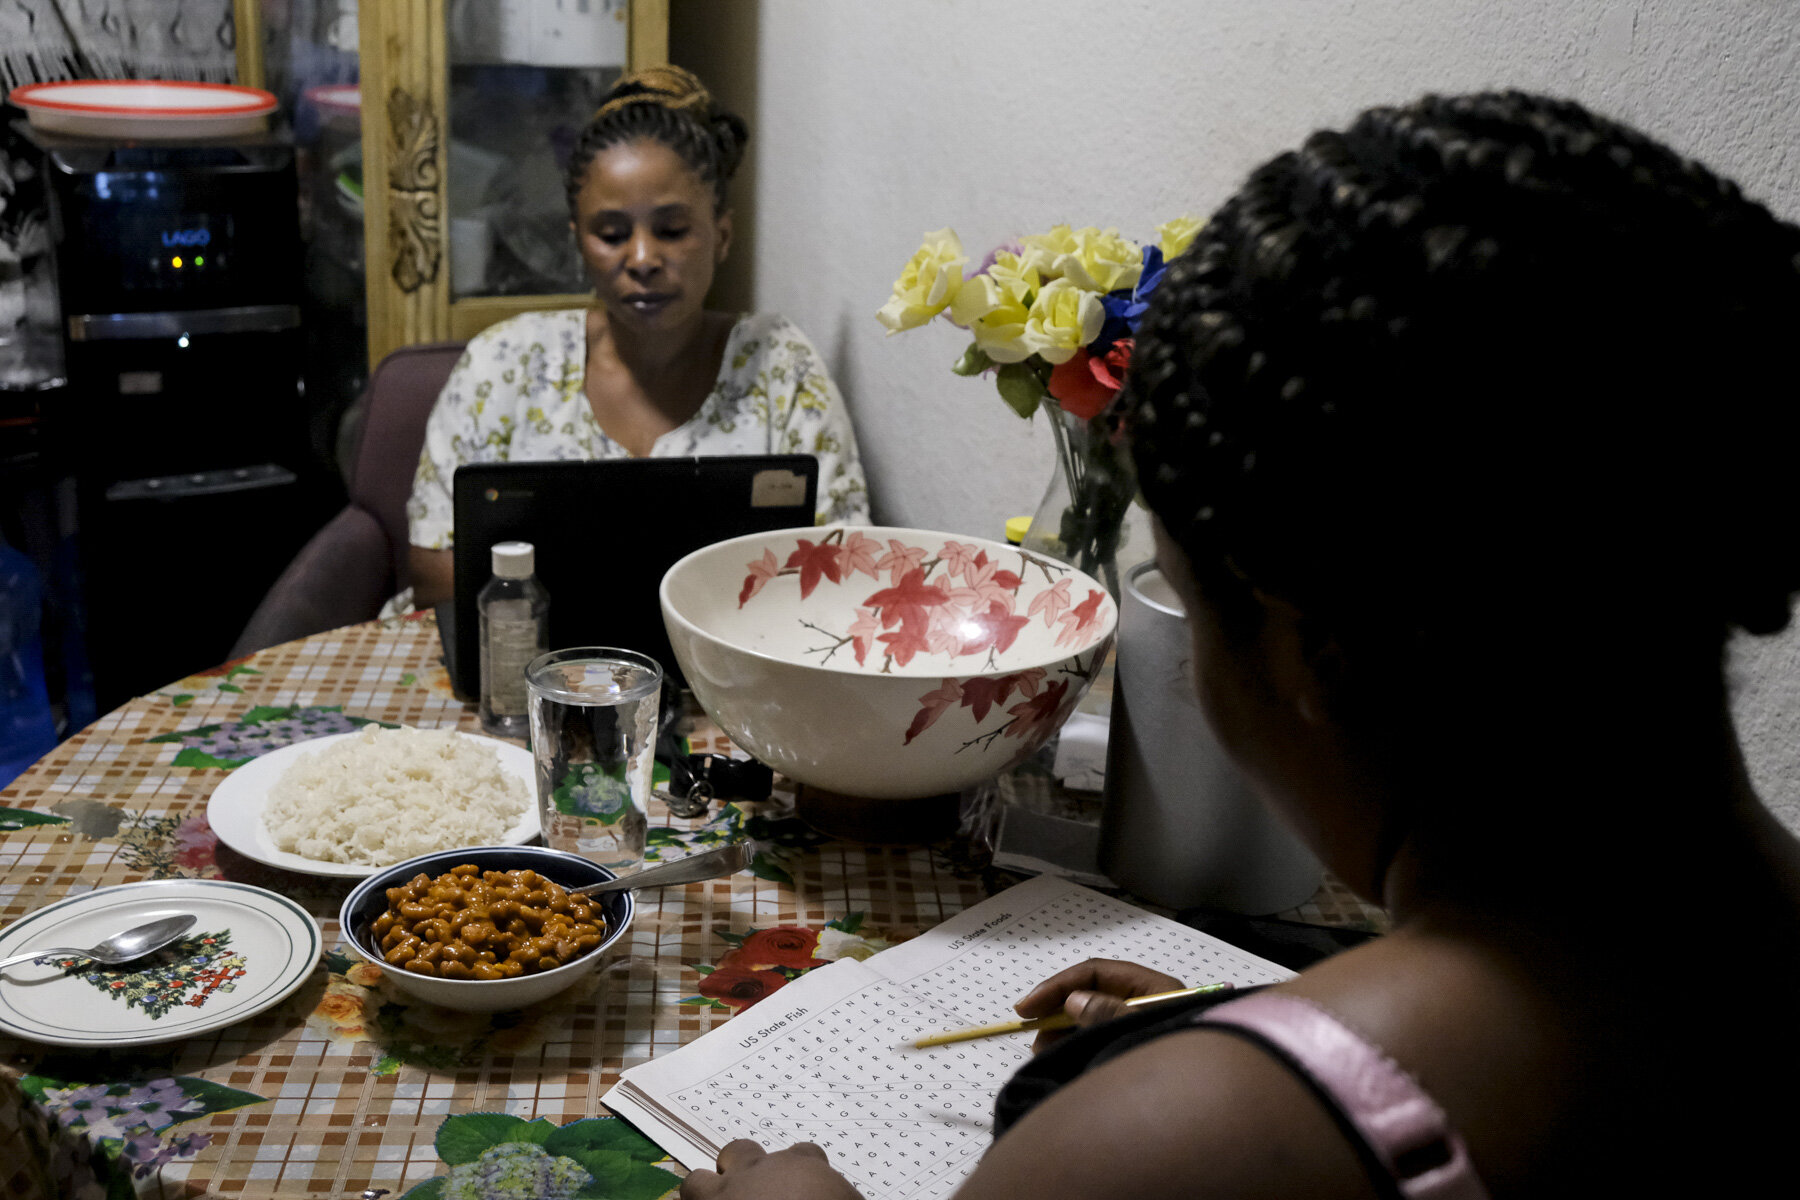  USA, San Diego, CA, October 26, 2020. Over dinner, Edina Shabani, 20, works through an U.S. Fish crossword puzzle while her mother, Shabani attends a school district meeting for ESL parents.&nbsp; The meetings aim to foster feedback on distance lear